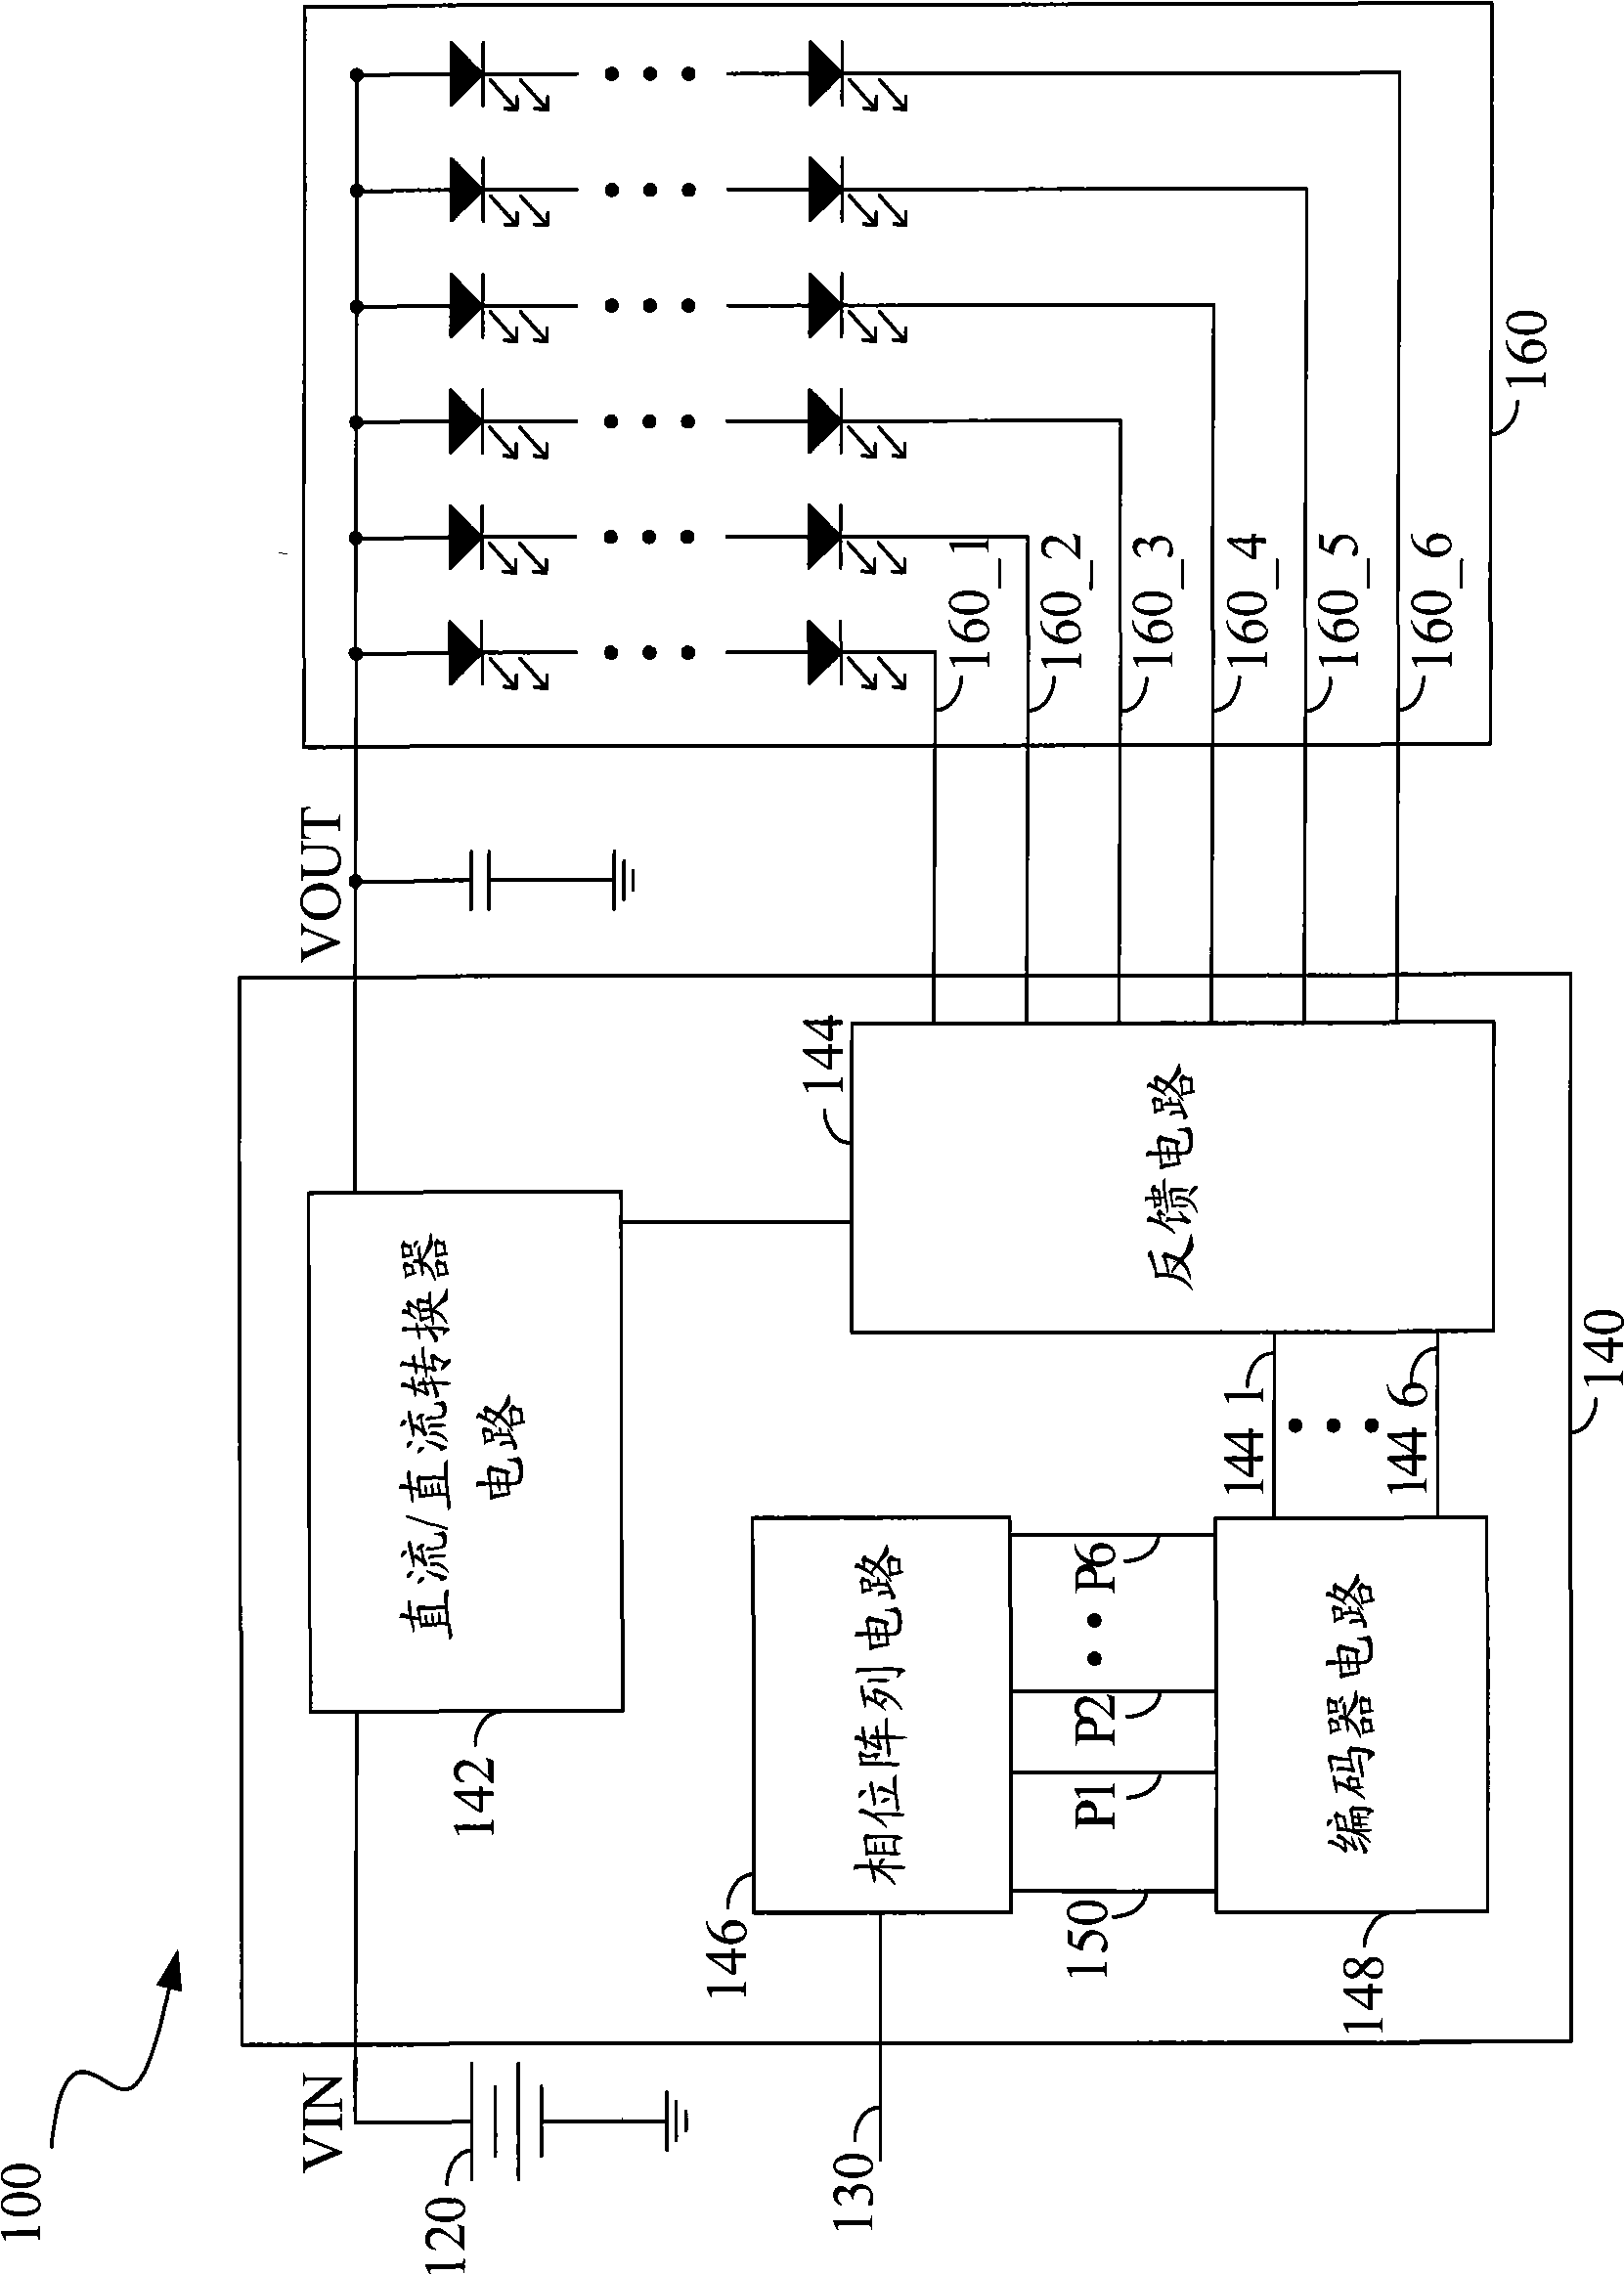 Backlight controller, method for driving light sources, and display system